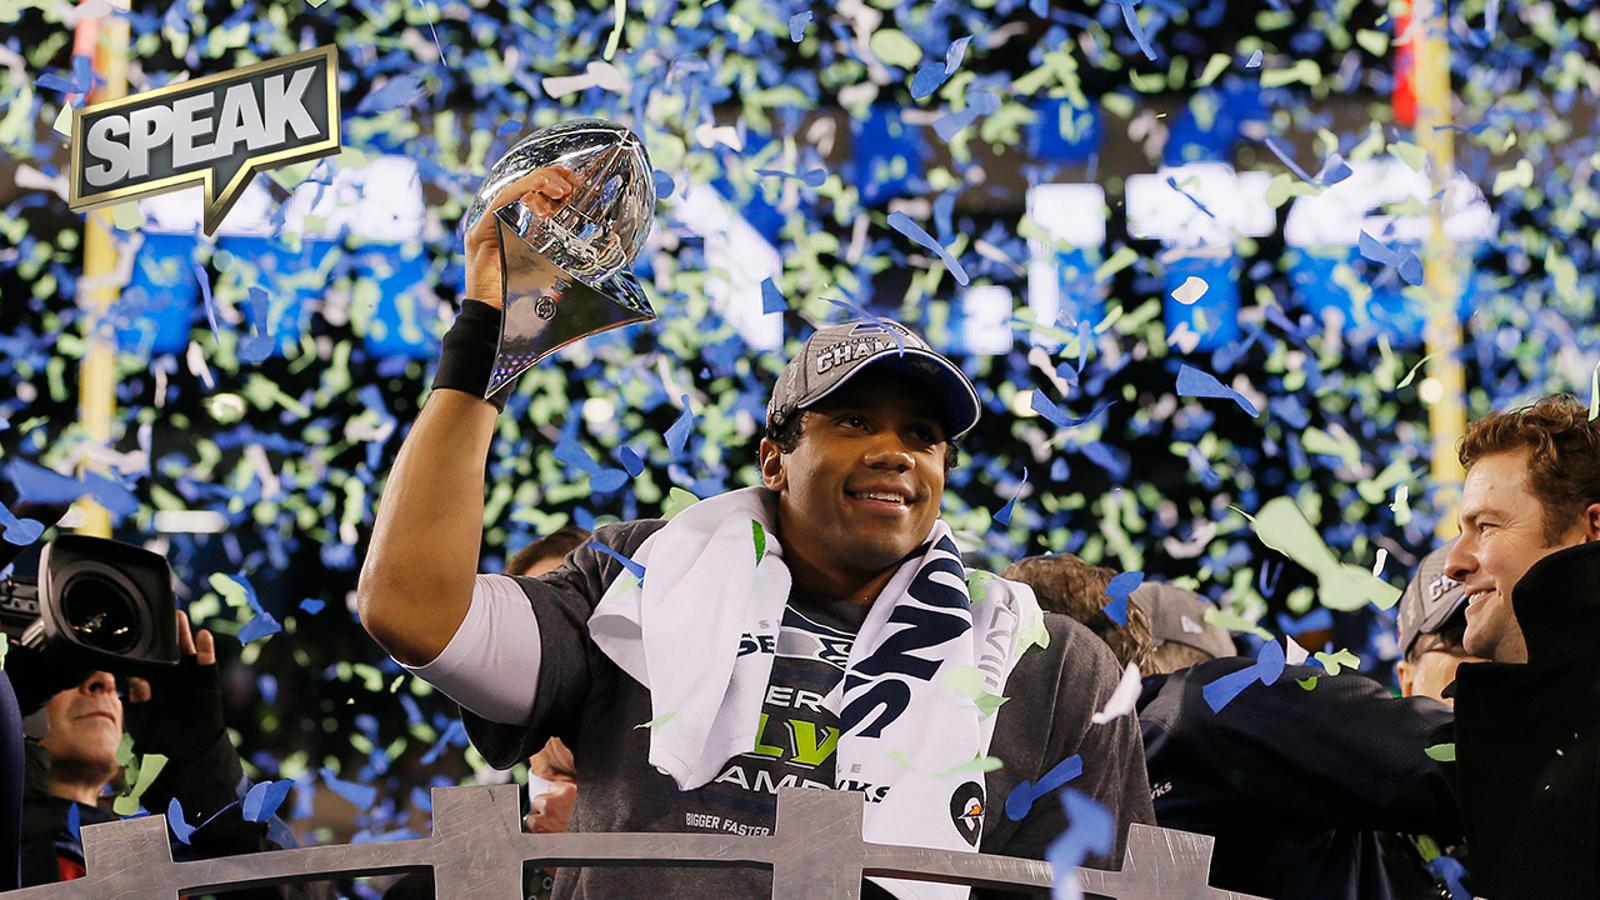 Russell Wilson's #3 jersey is given away by Seahawks